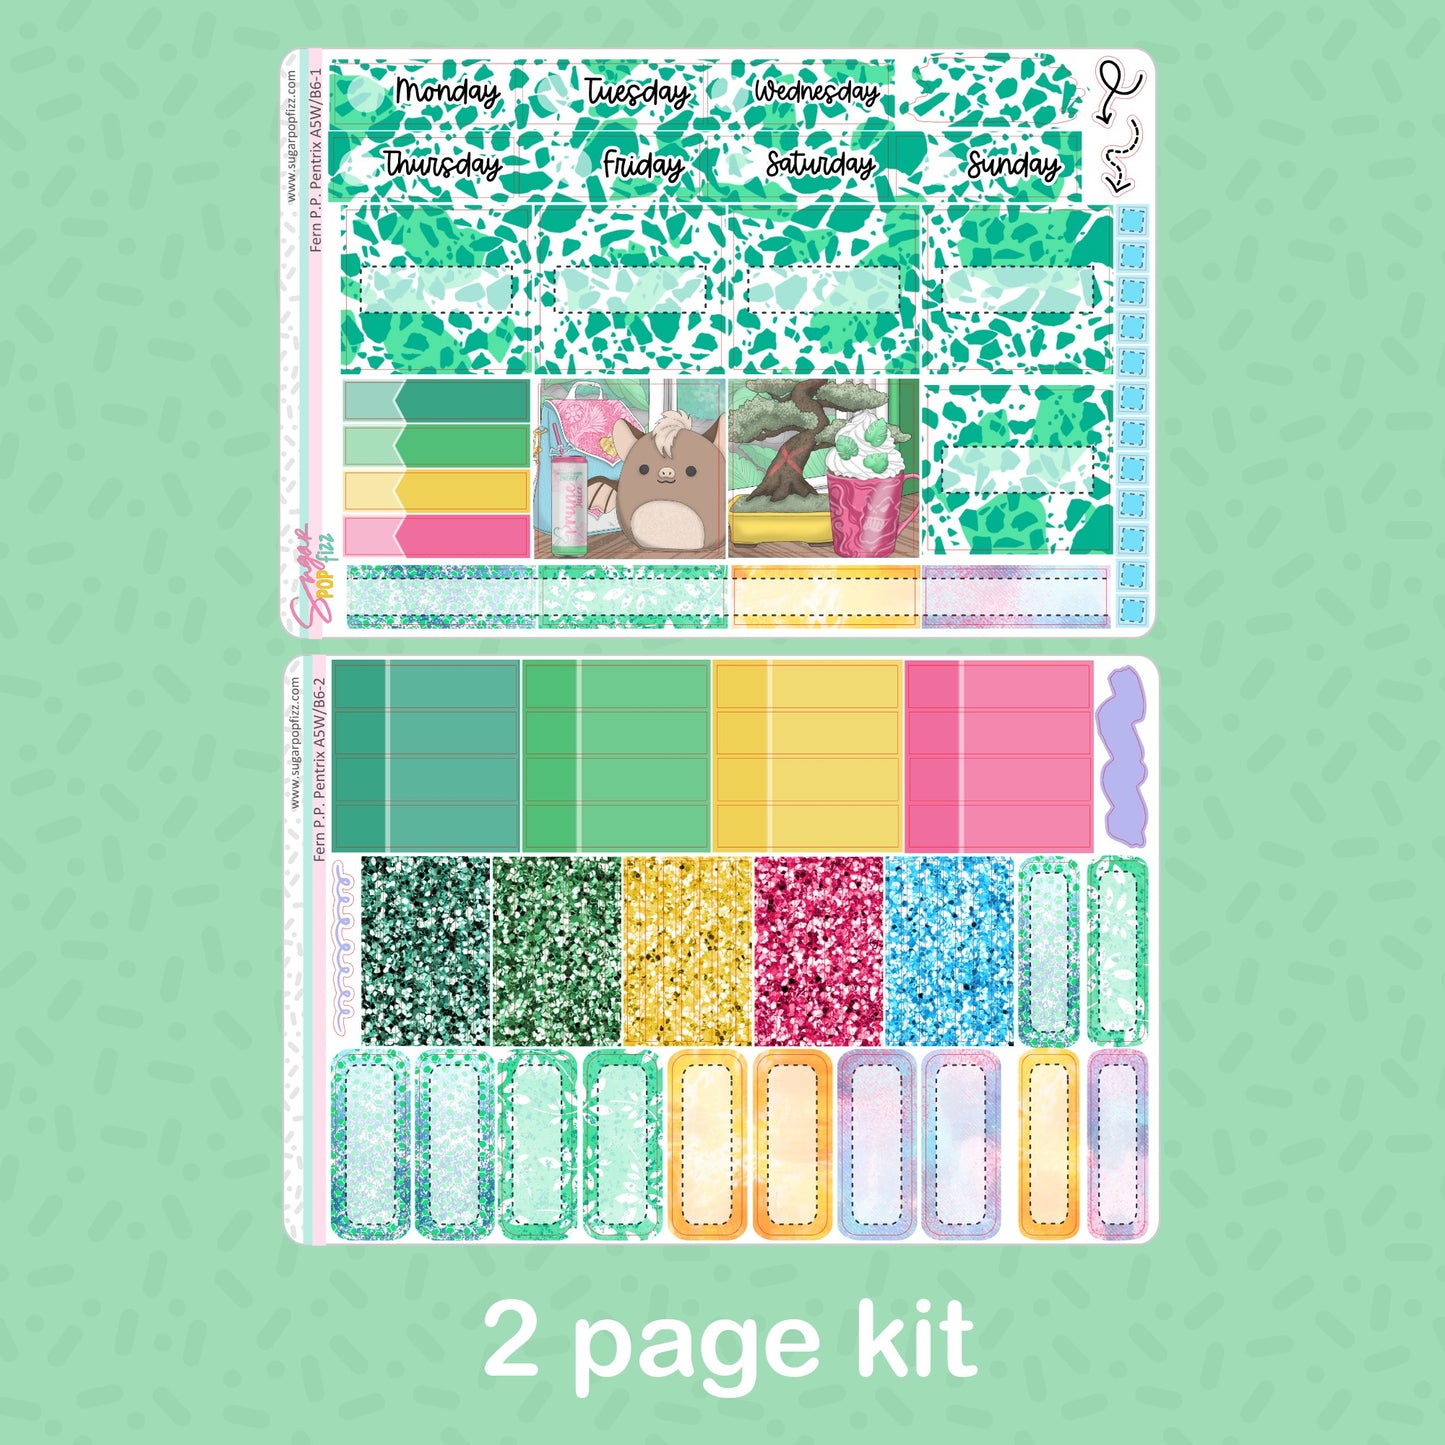 Fern Penny Pages Pentrix Weekly Kit